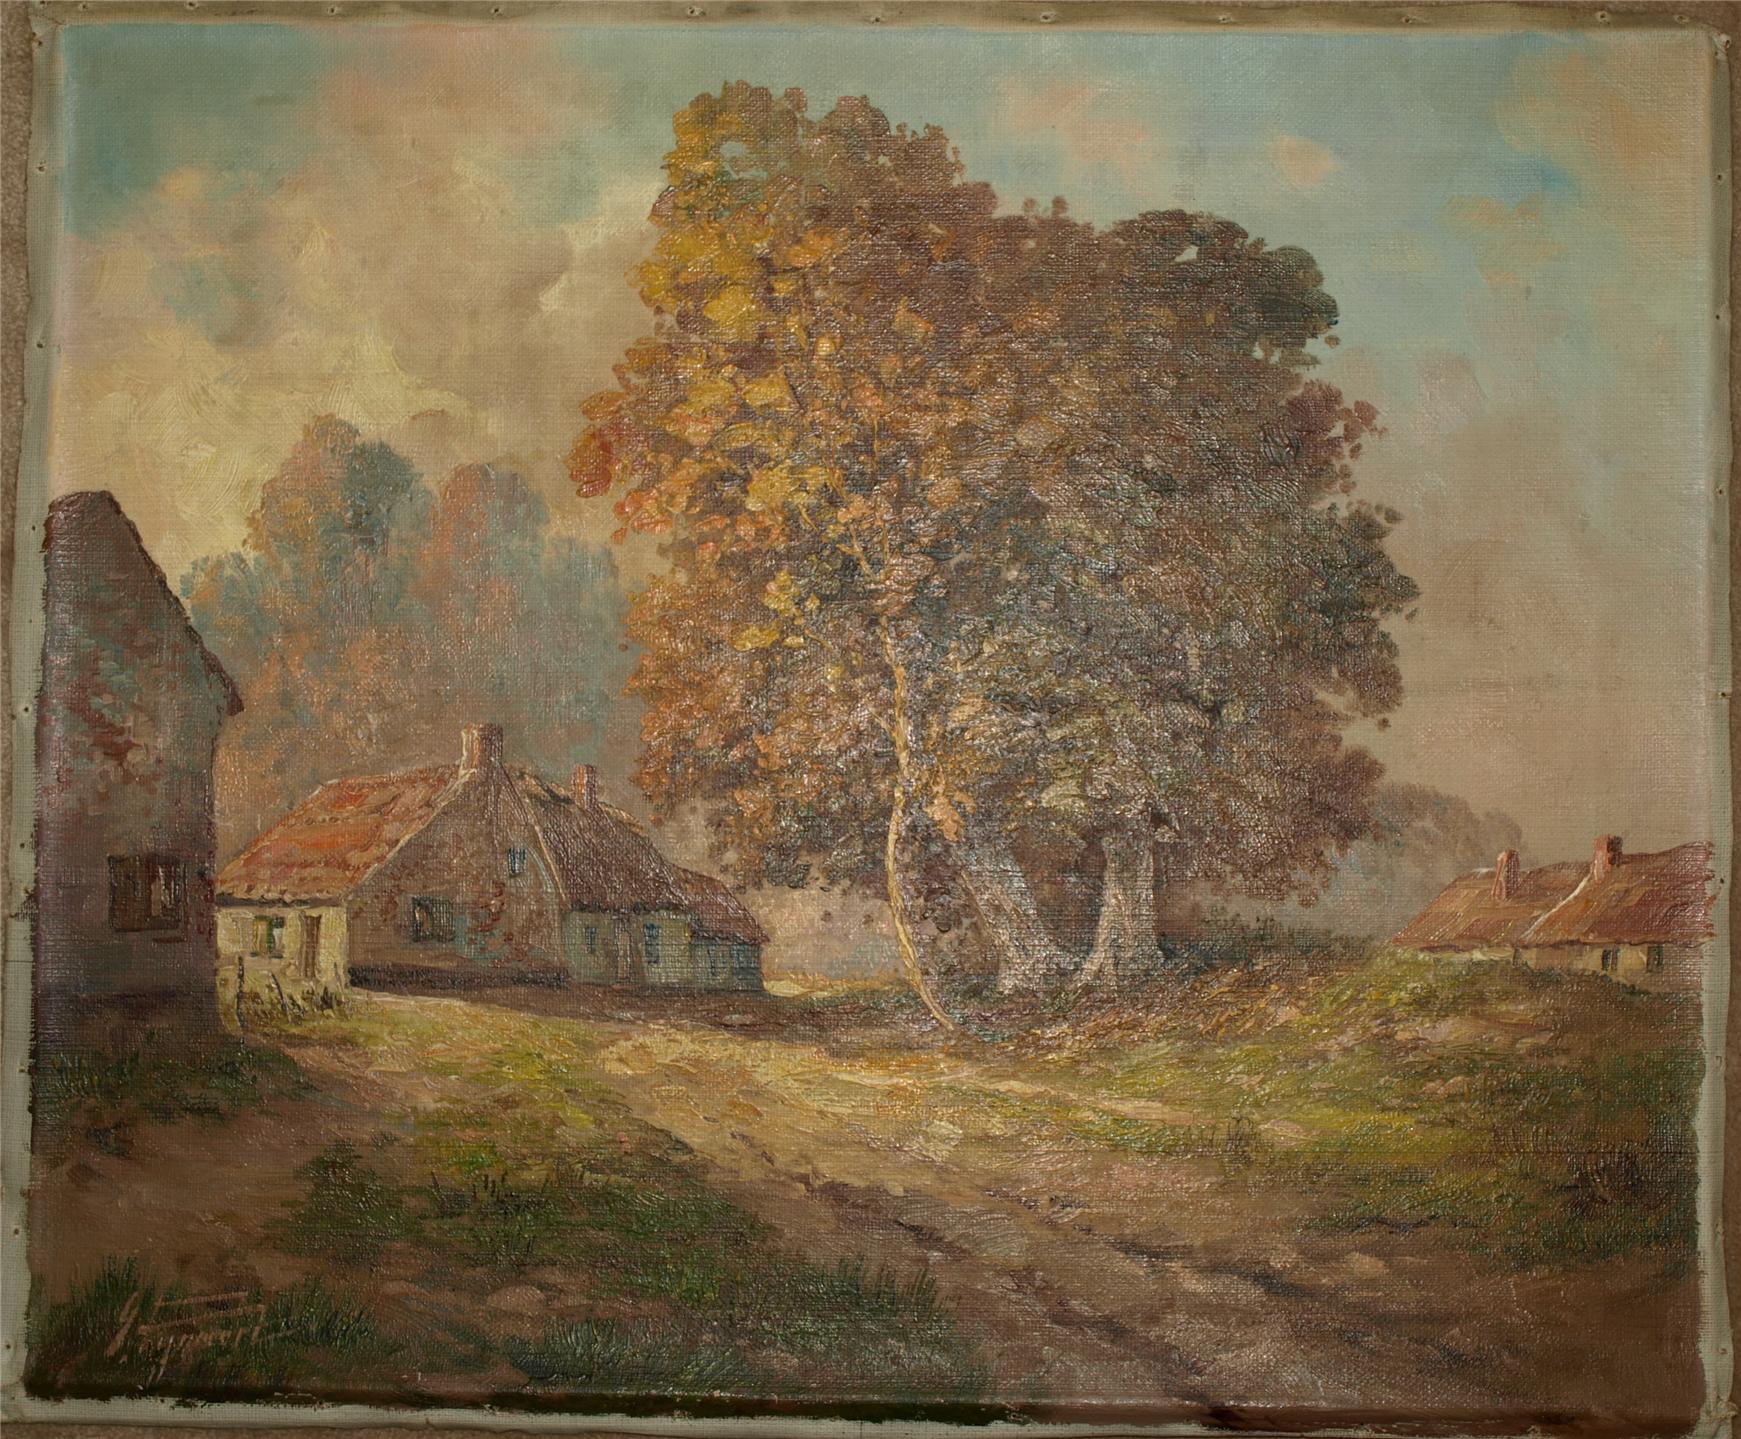 ANTIQUE OIL PAINTING - BELGIAN - COUNTRYSIDE - LISTED ARTIST G. PYNAERT